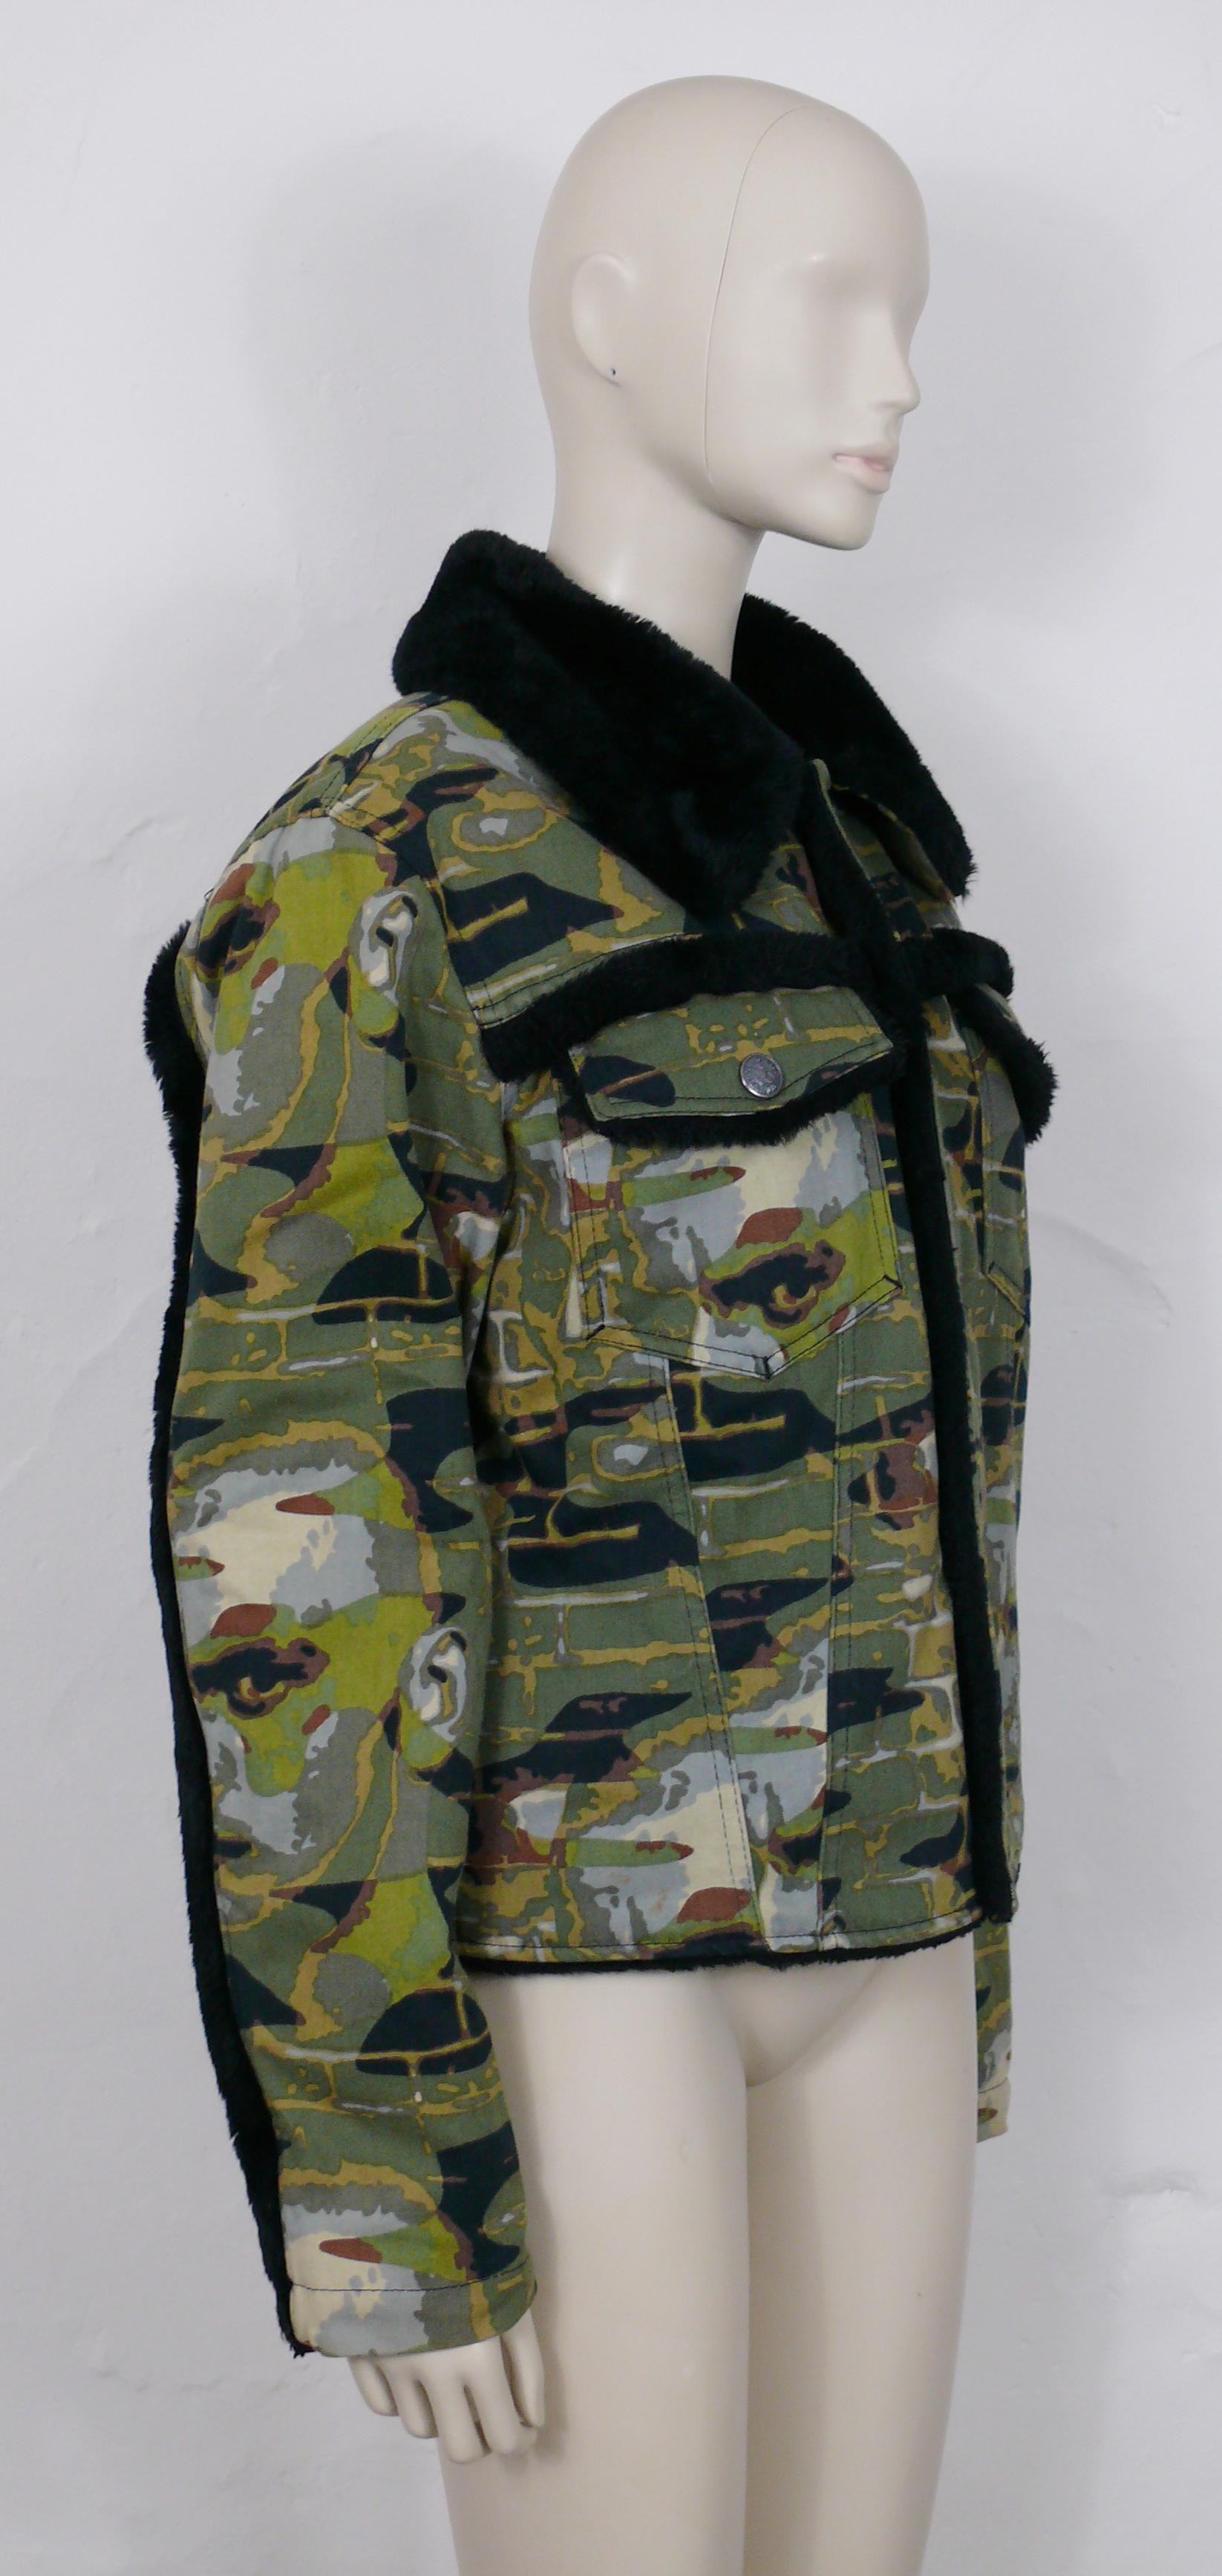 JEAN PAUL GAULTIER vintage jacket featuring a green/brown/black camouflage print with faces and walls.

This jacket features :
- Green/brown and black camouflage design print featuring faces and walls.
- Classic collar with black faux fur.
- Faux